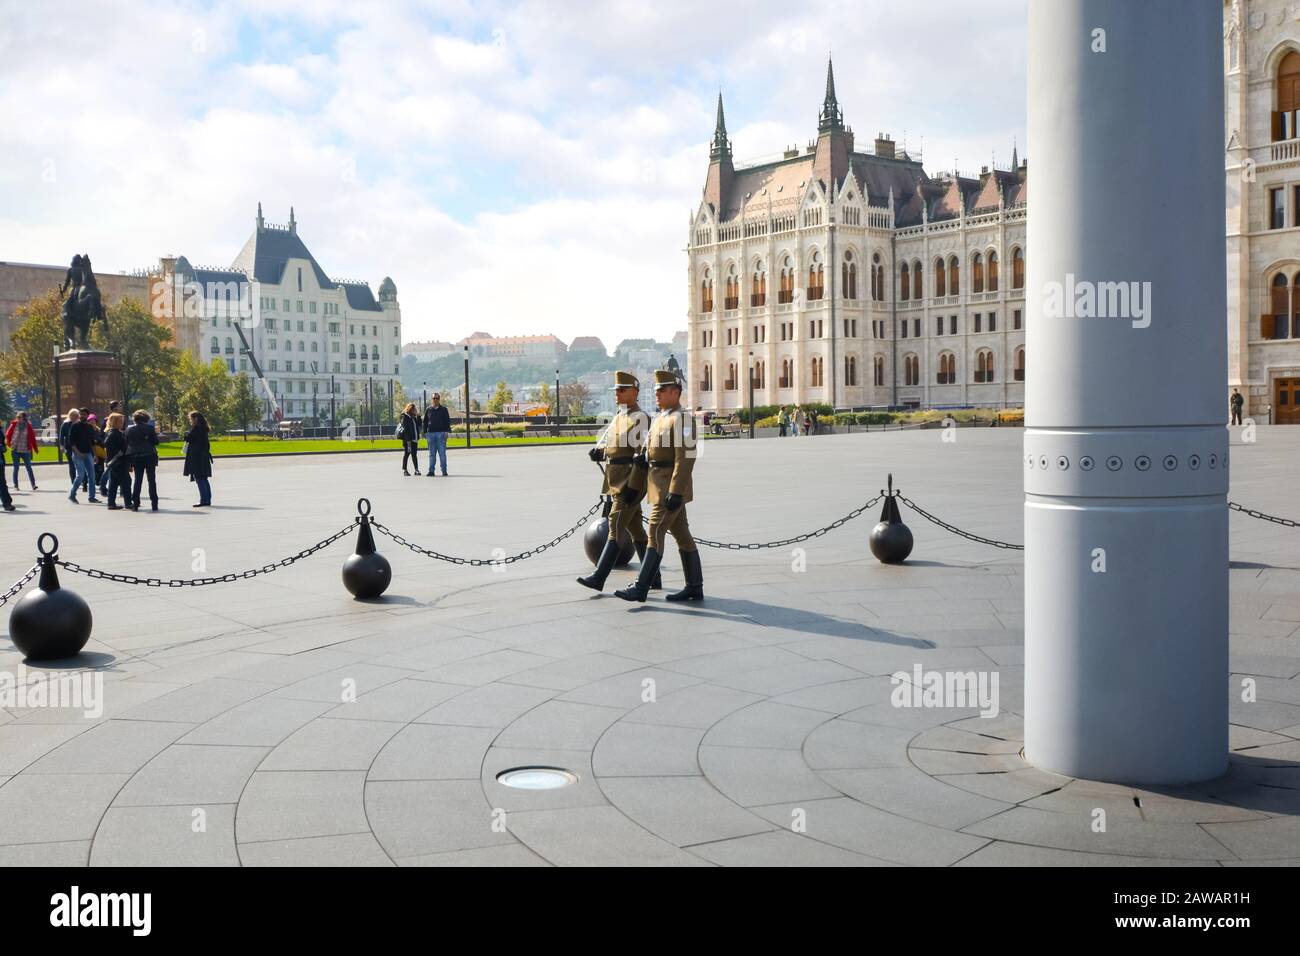 Armed, uniformed guards march in front or the Hungarian Parliament building in Budapest, Hungary Stock Photo